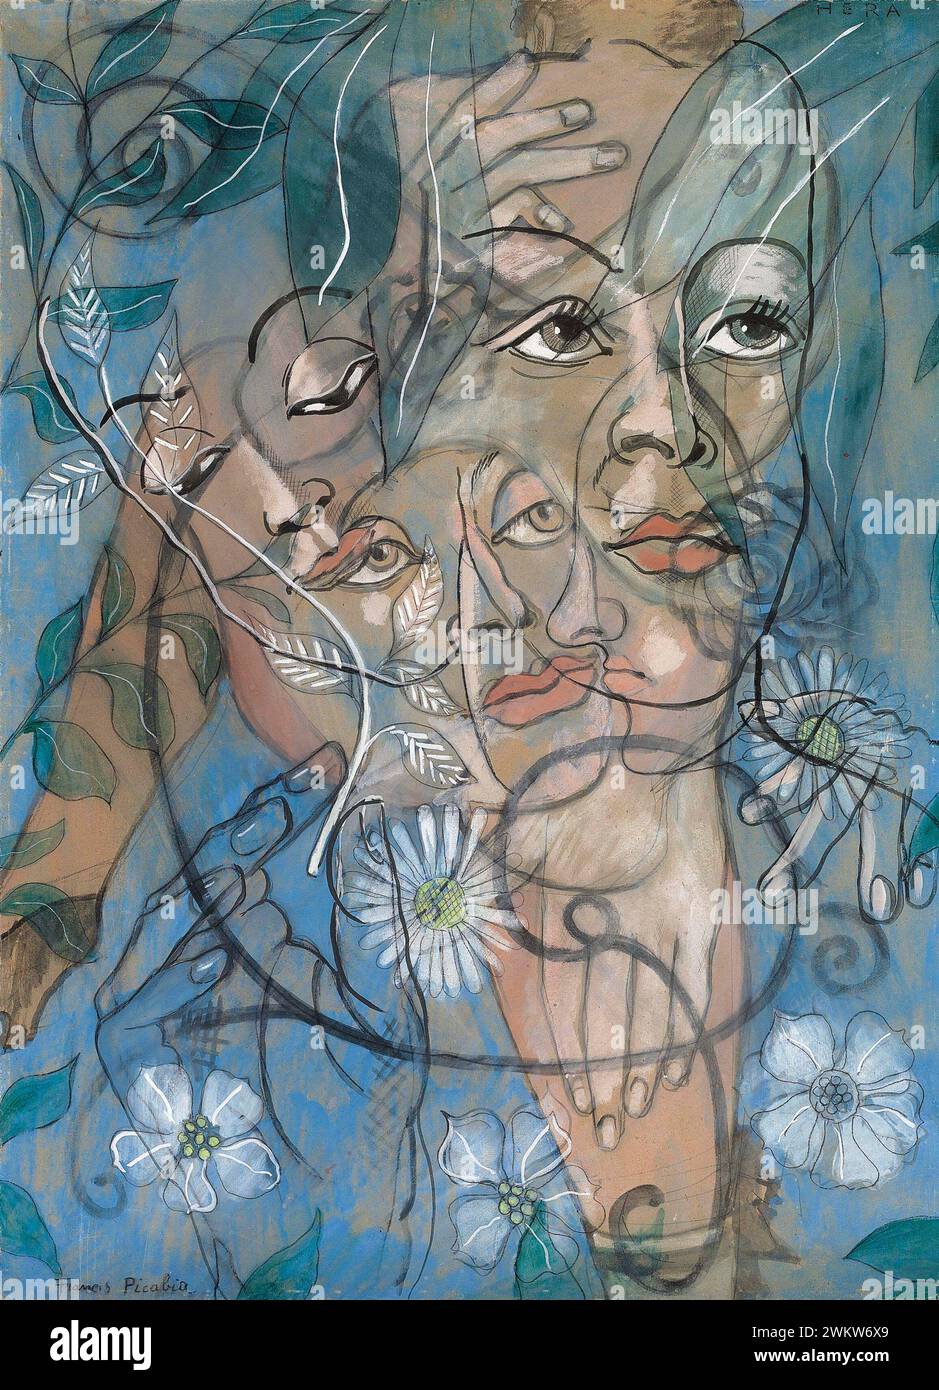 Hera, oil, gouache, charcoal and pencil on board painting by French artist Francis Picabia. Stock Photo